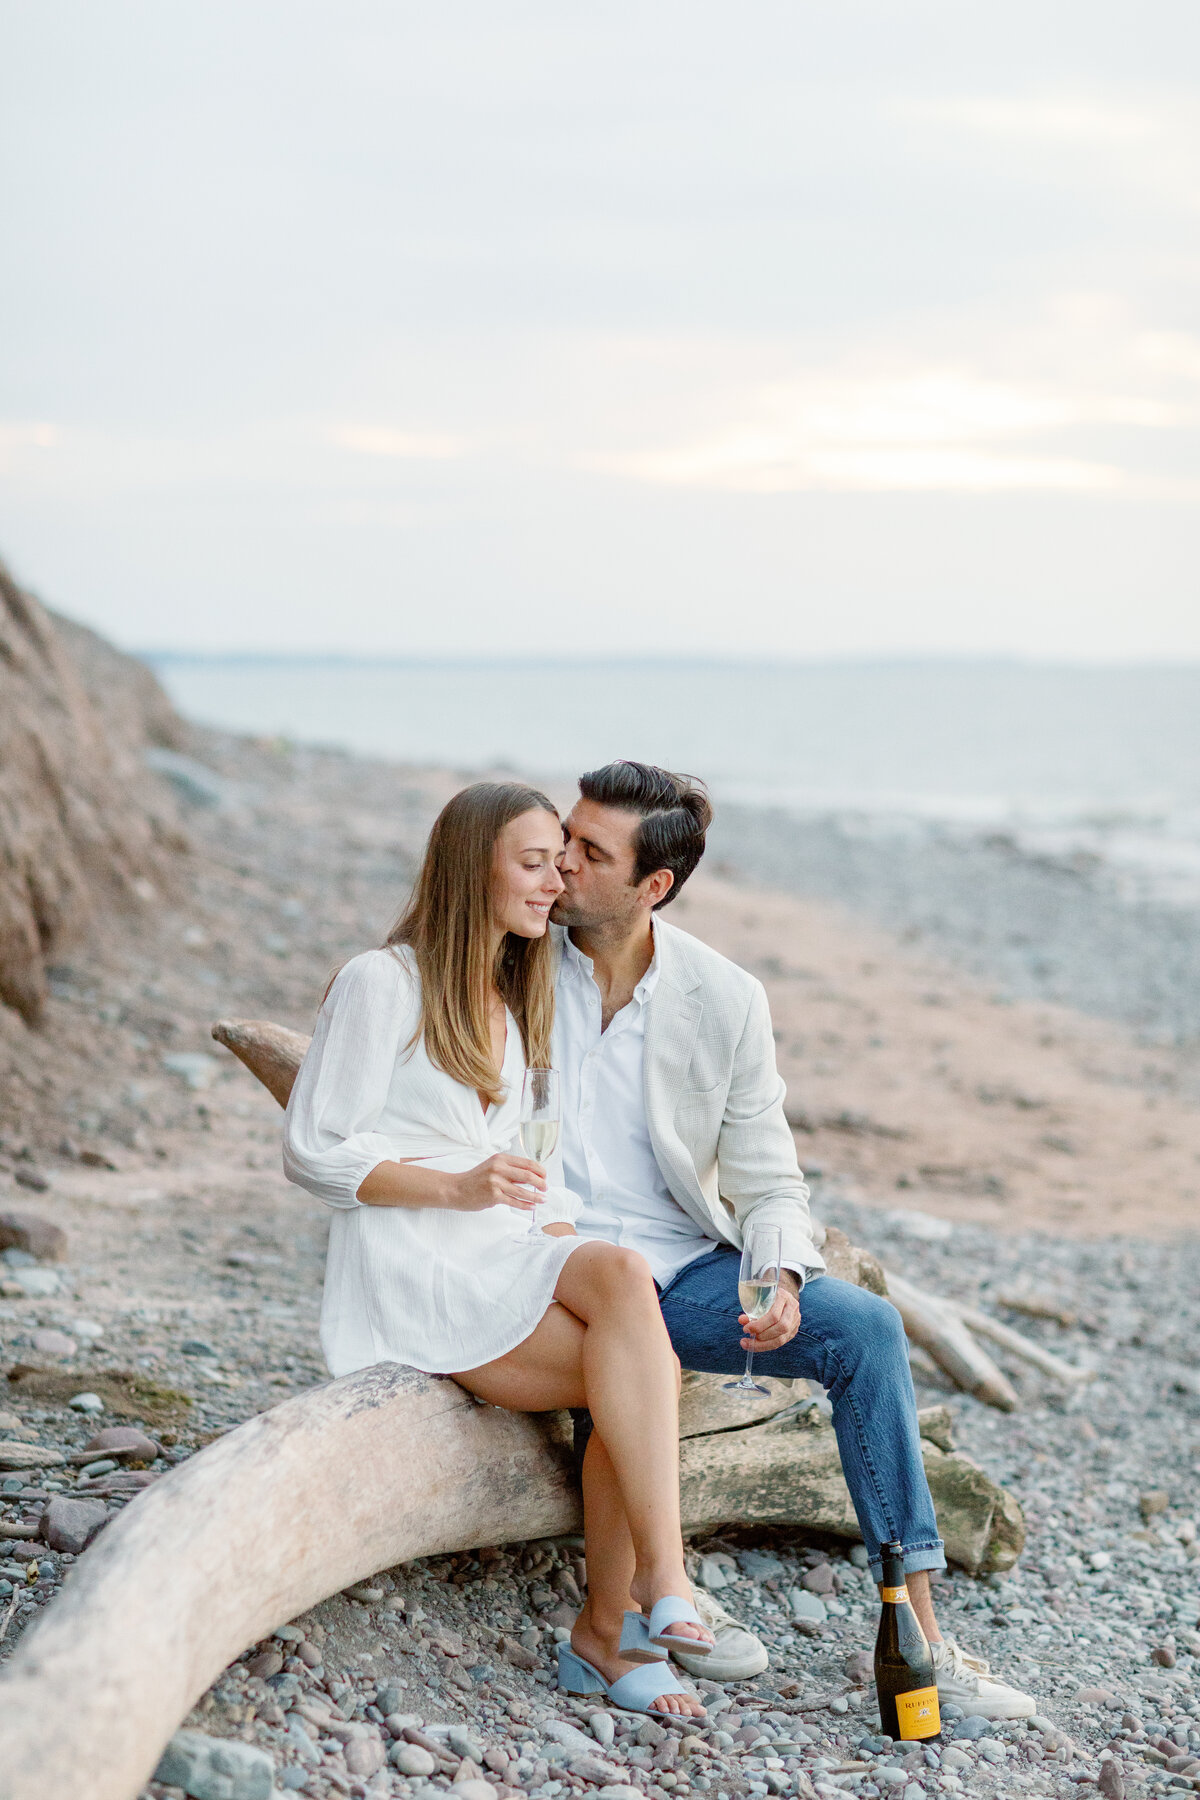 Couple sitting on driftwood and holding champagne glasses during their engagement session at Chimney Bluffs.